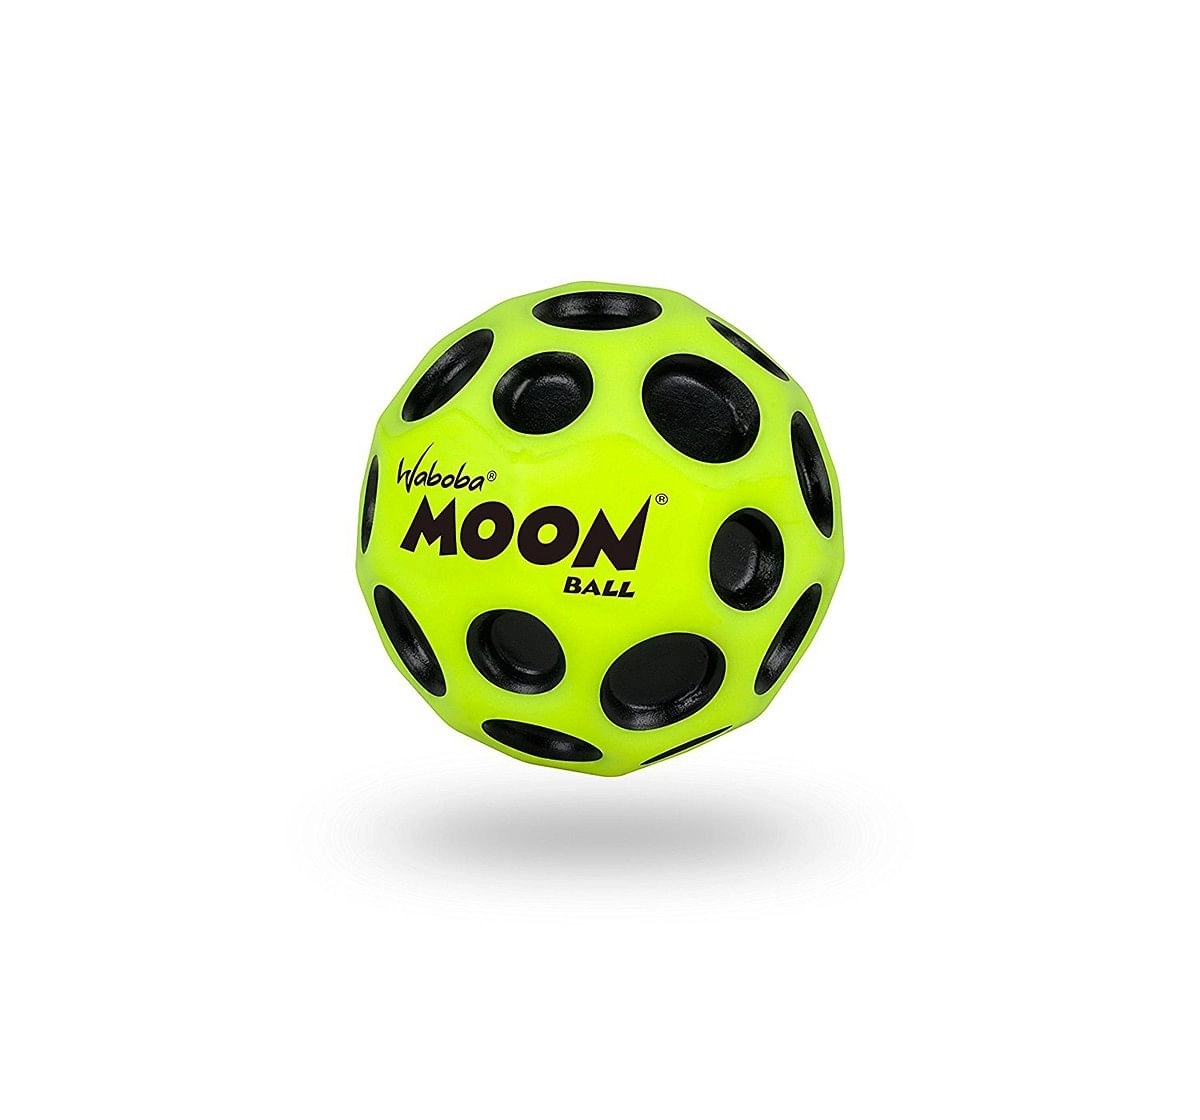 Waboba Moonball Ball Sports & Accessories for Kids age 5Y+ 